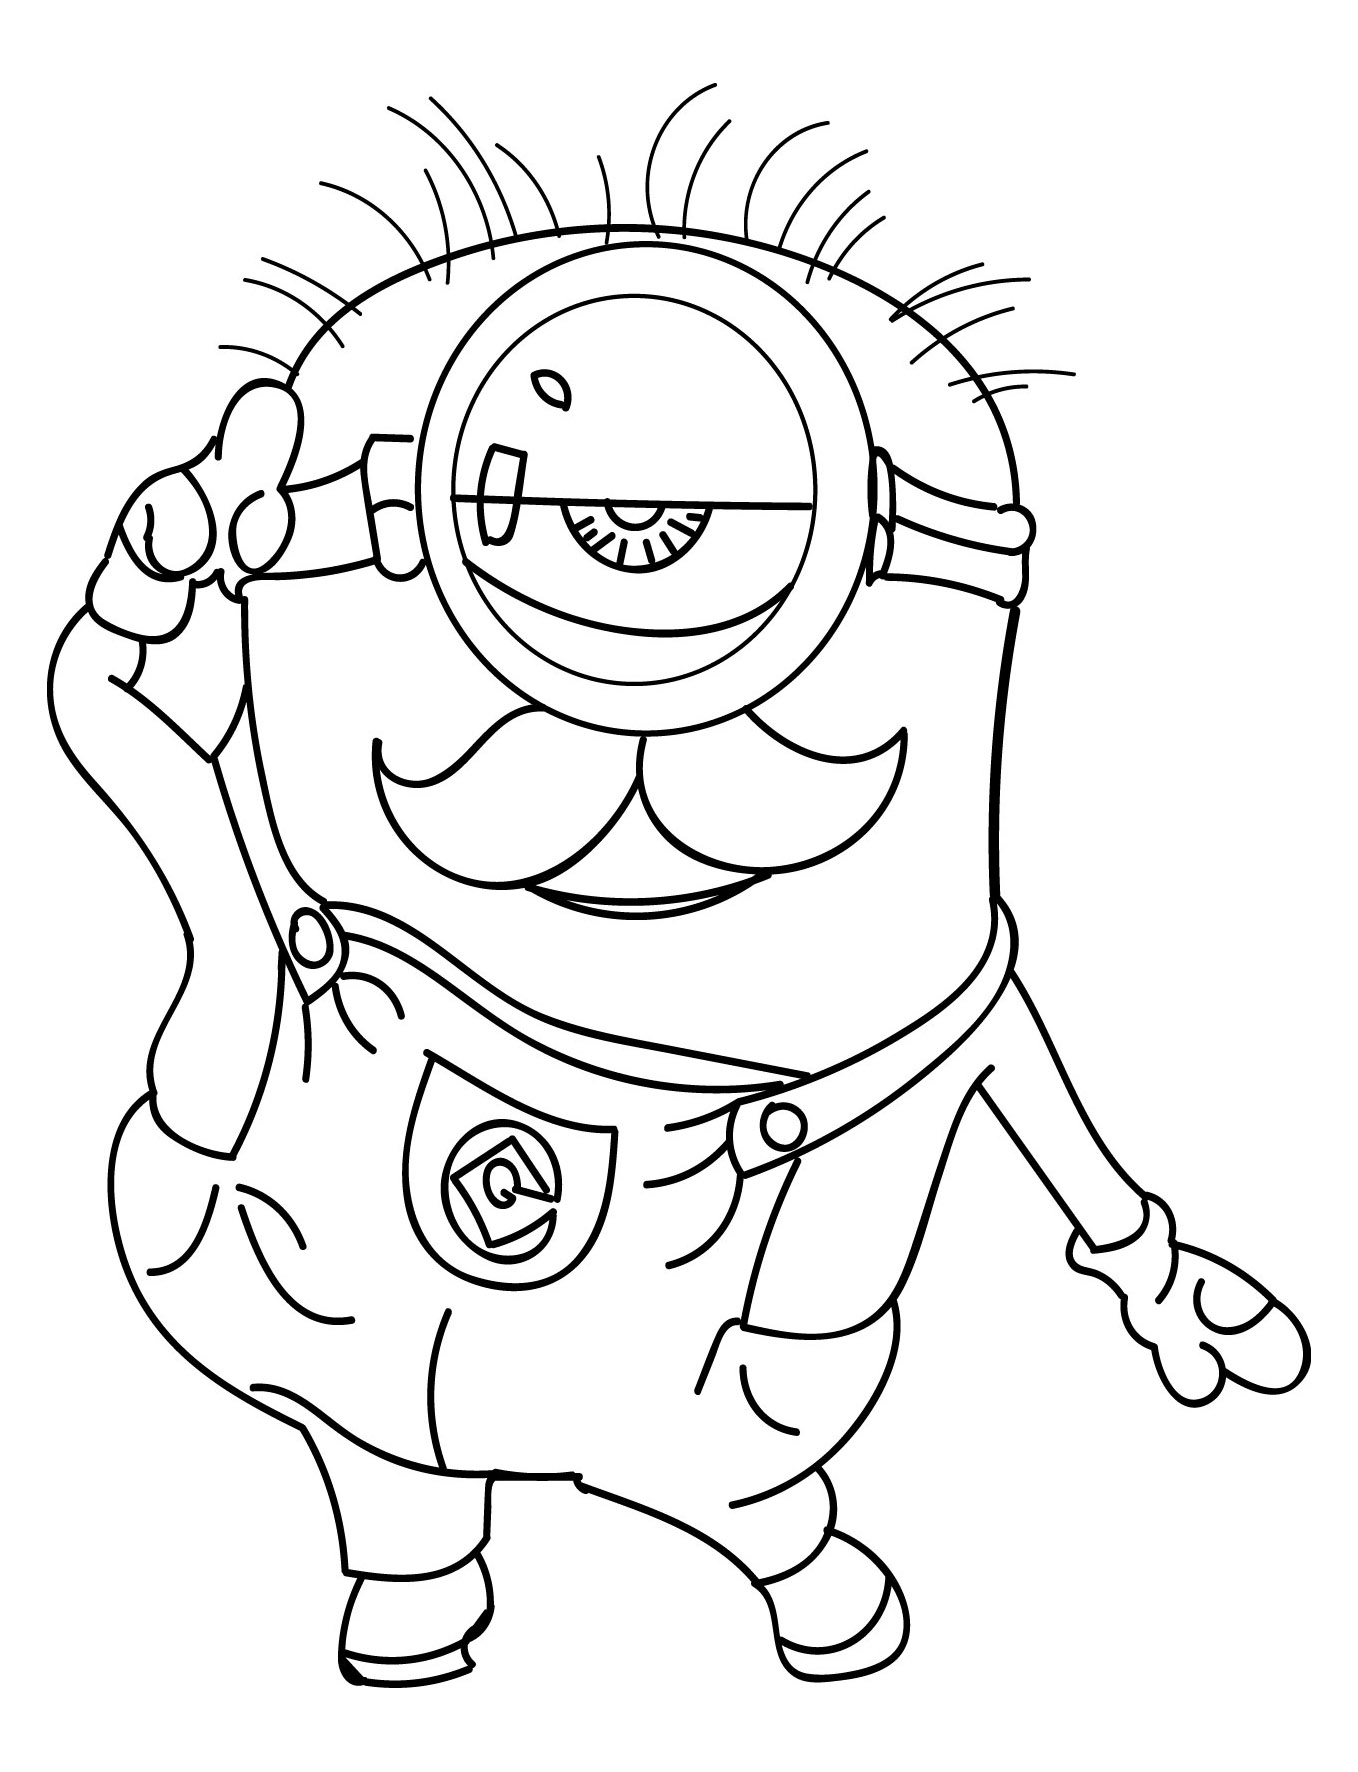 Minions picture to print and color - Minions Kids Coloring Pages